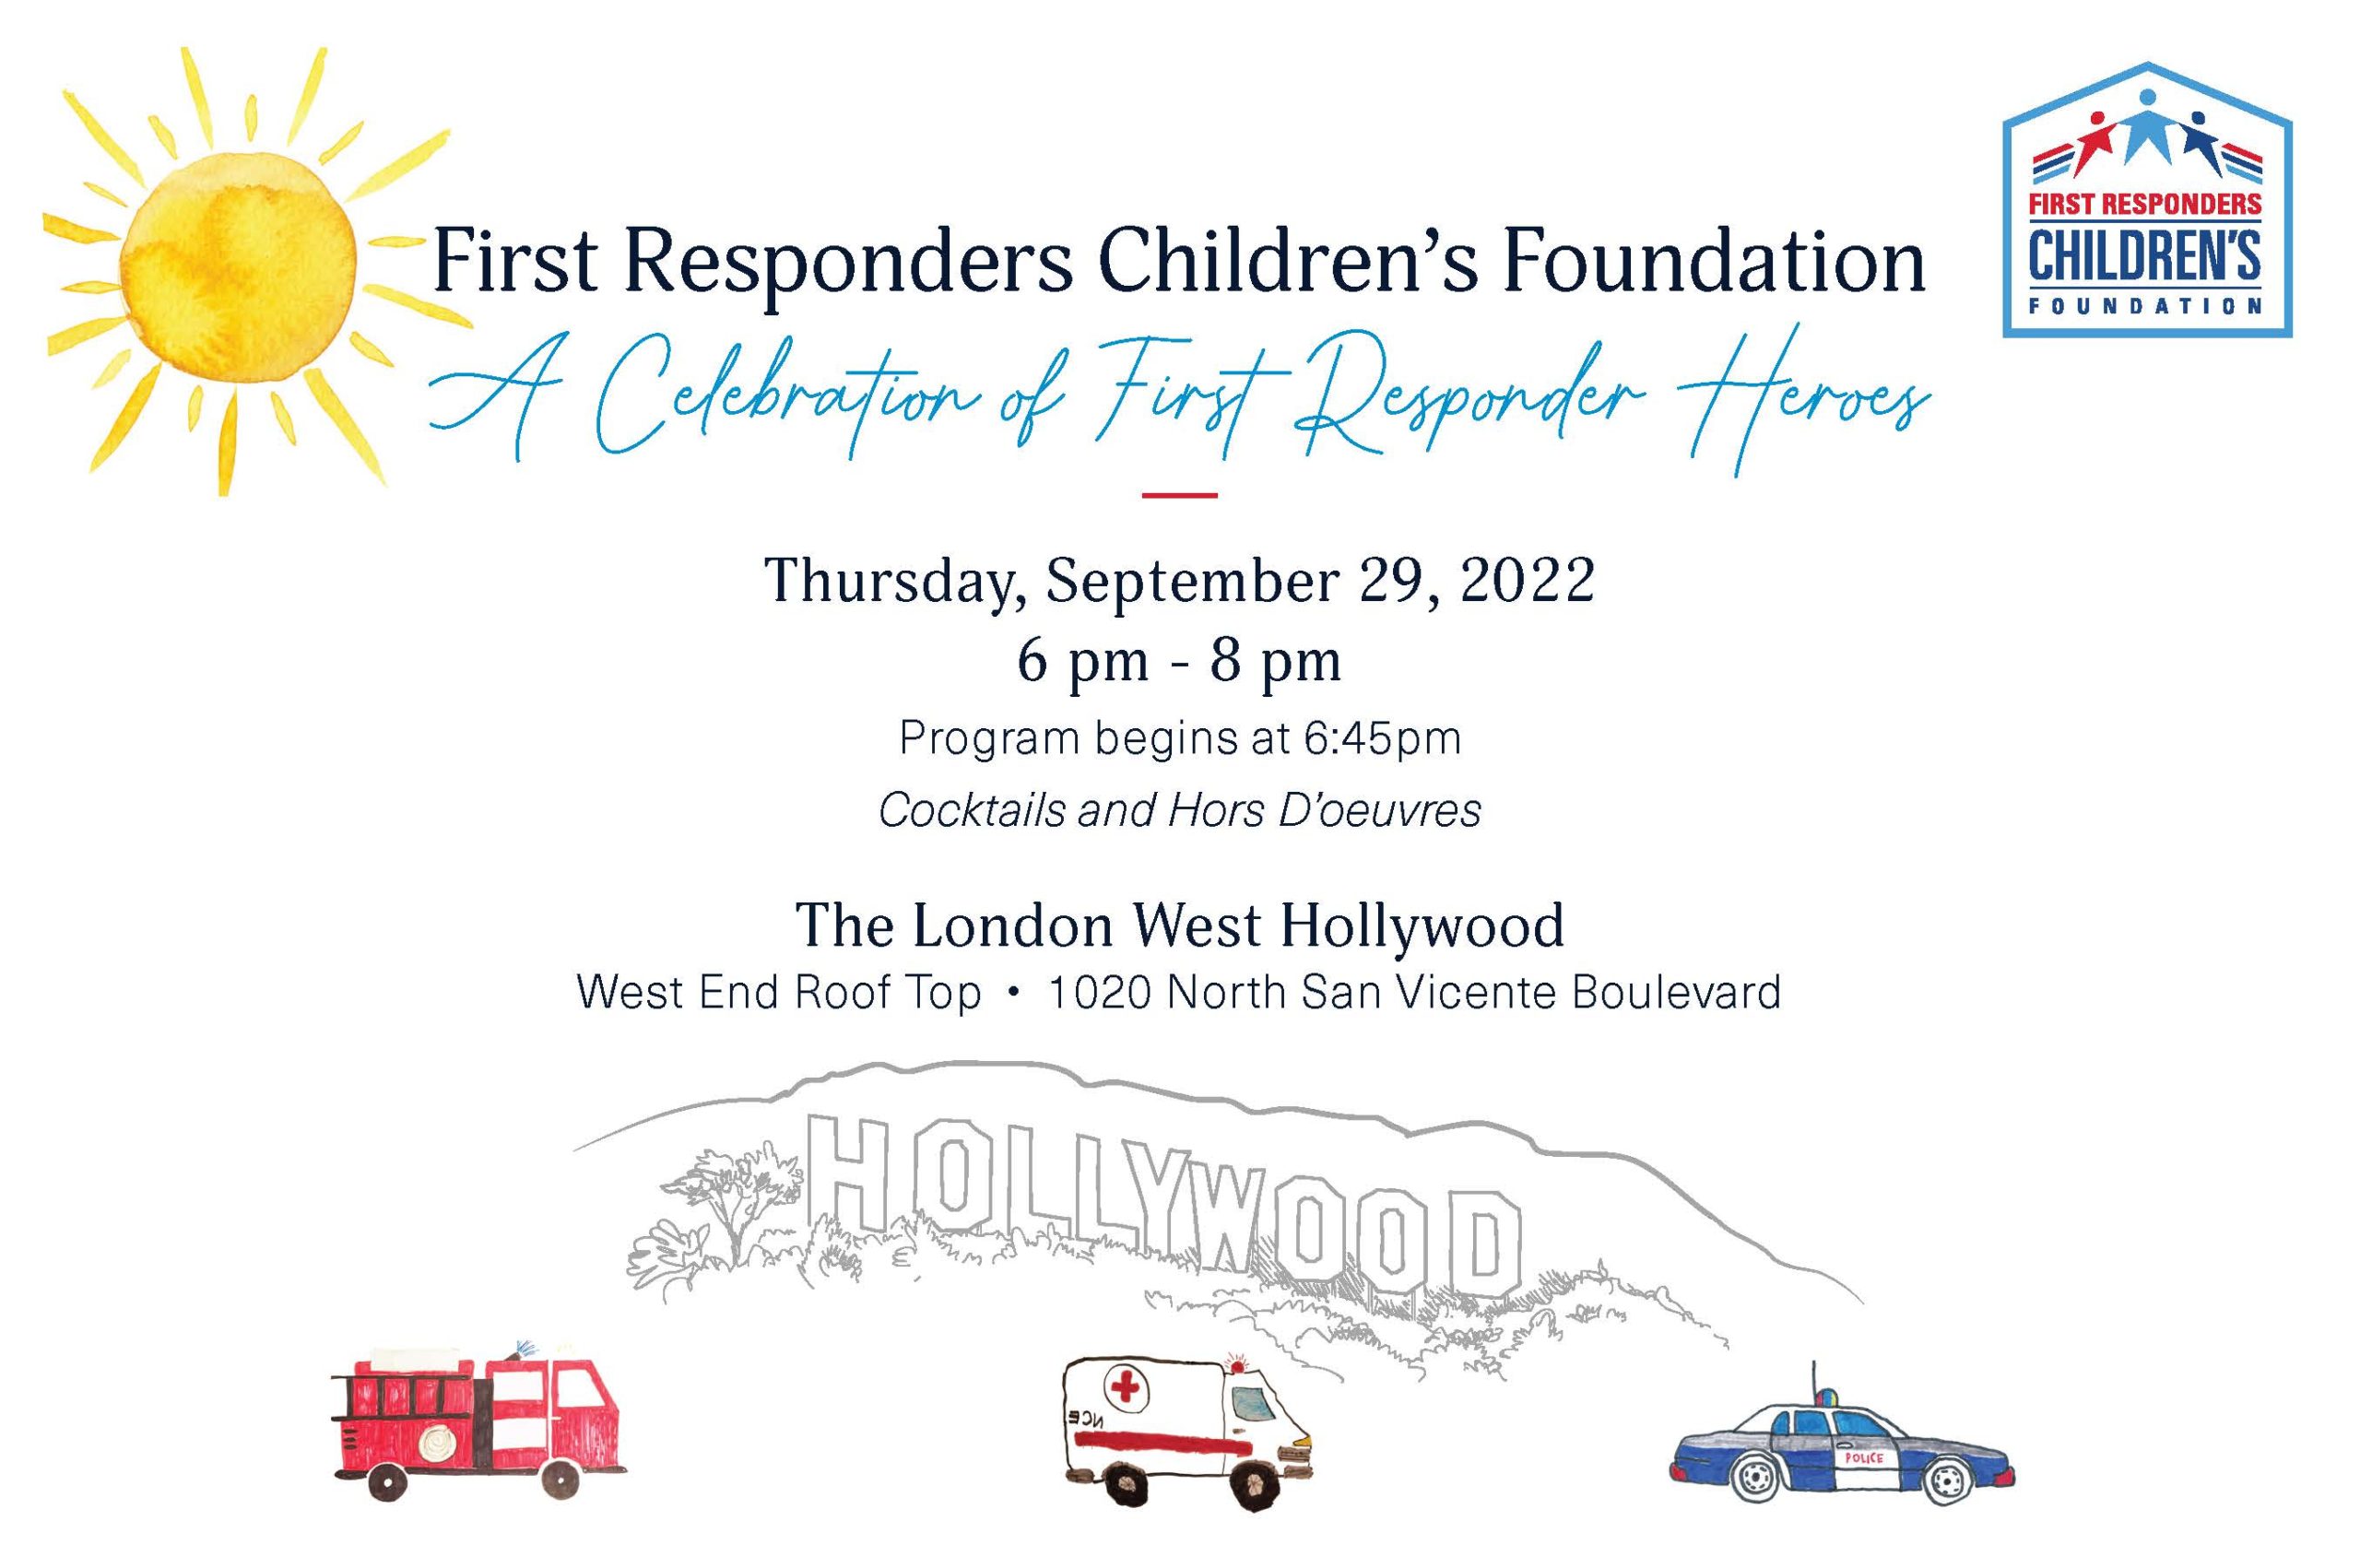 FRCF Launches Mental Health Programming in California for First Responders’ Families